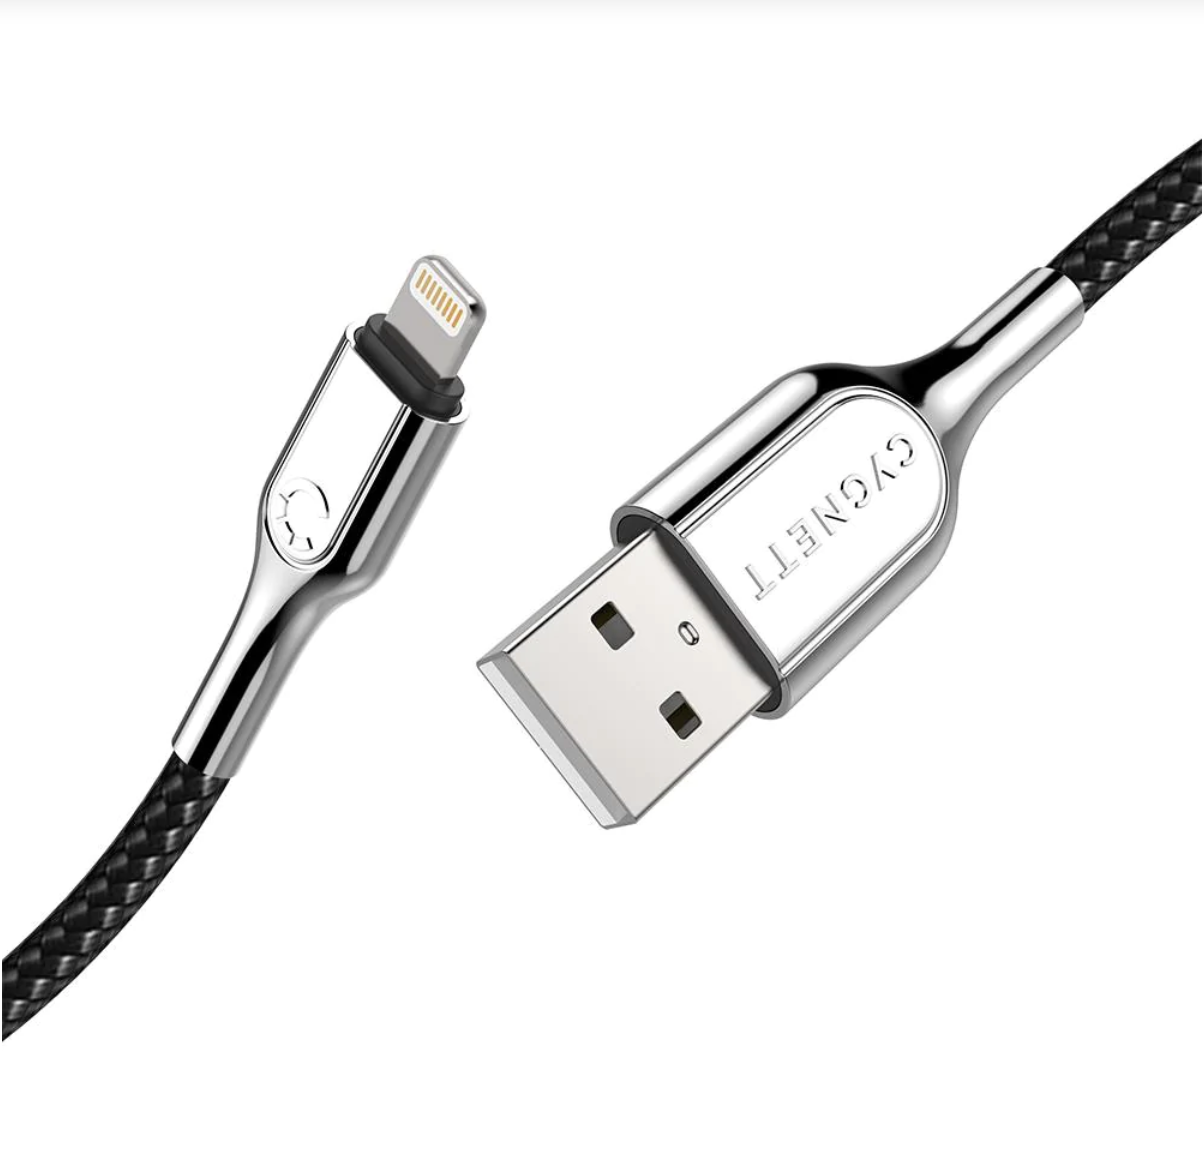 Cygnett Armoured Lightning to USB-A Cable 2M